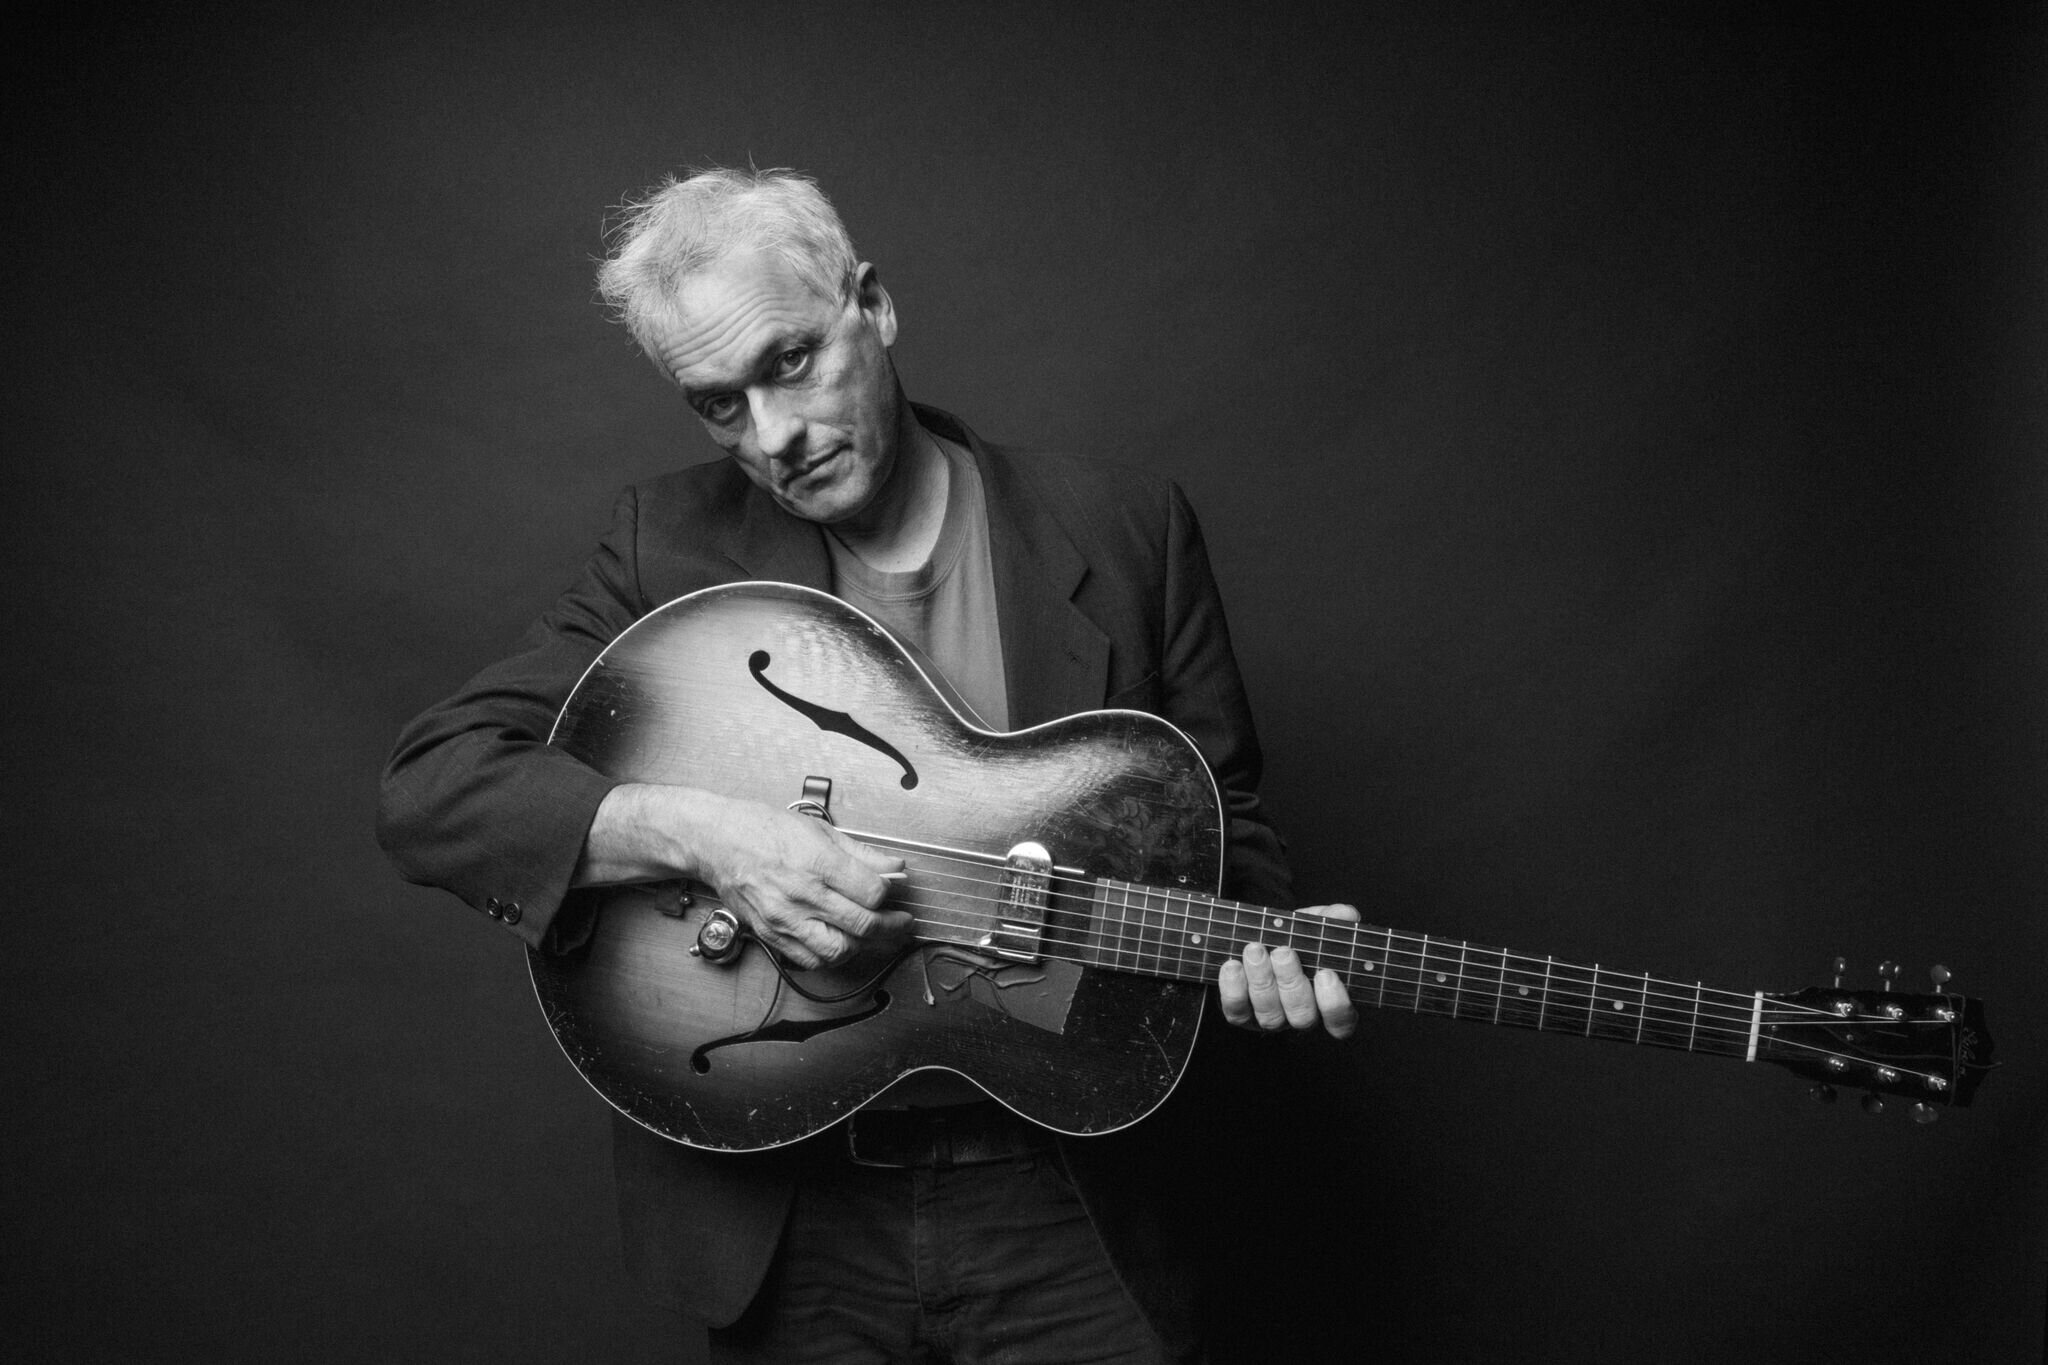 MARC RIBOT'S SONGS OF RESISTANCE